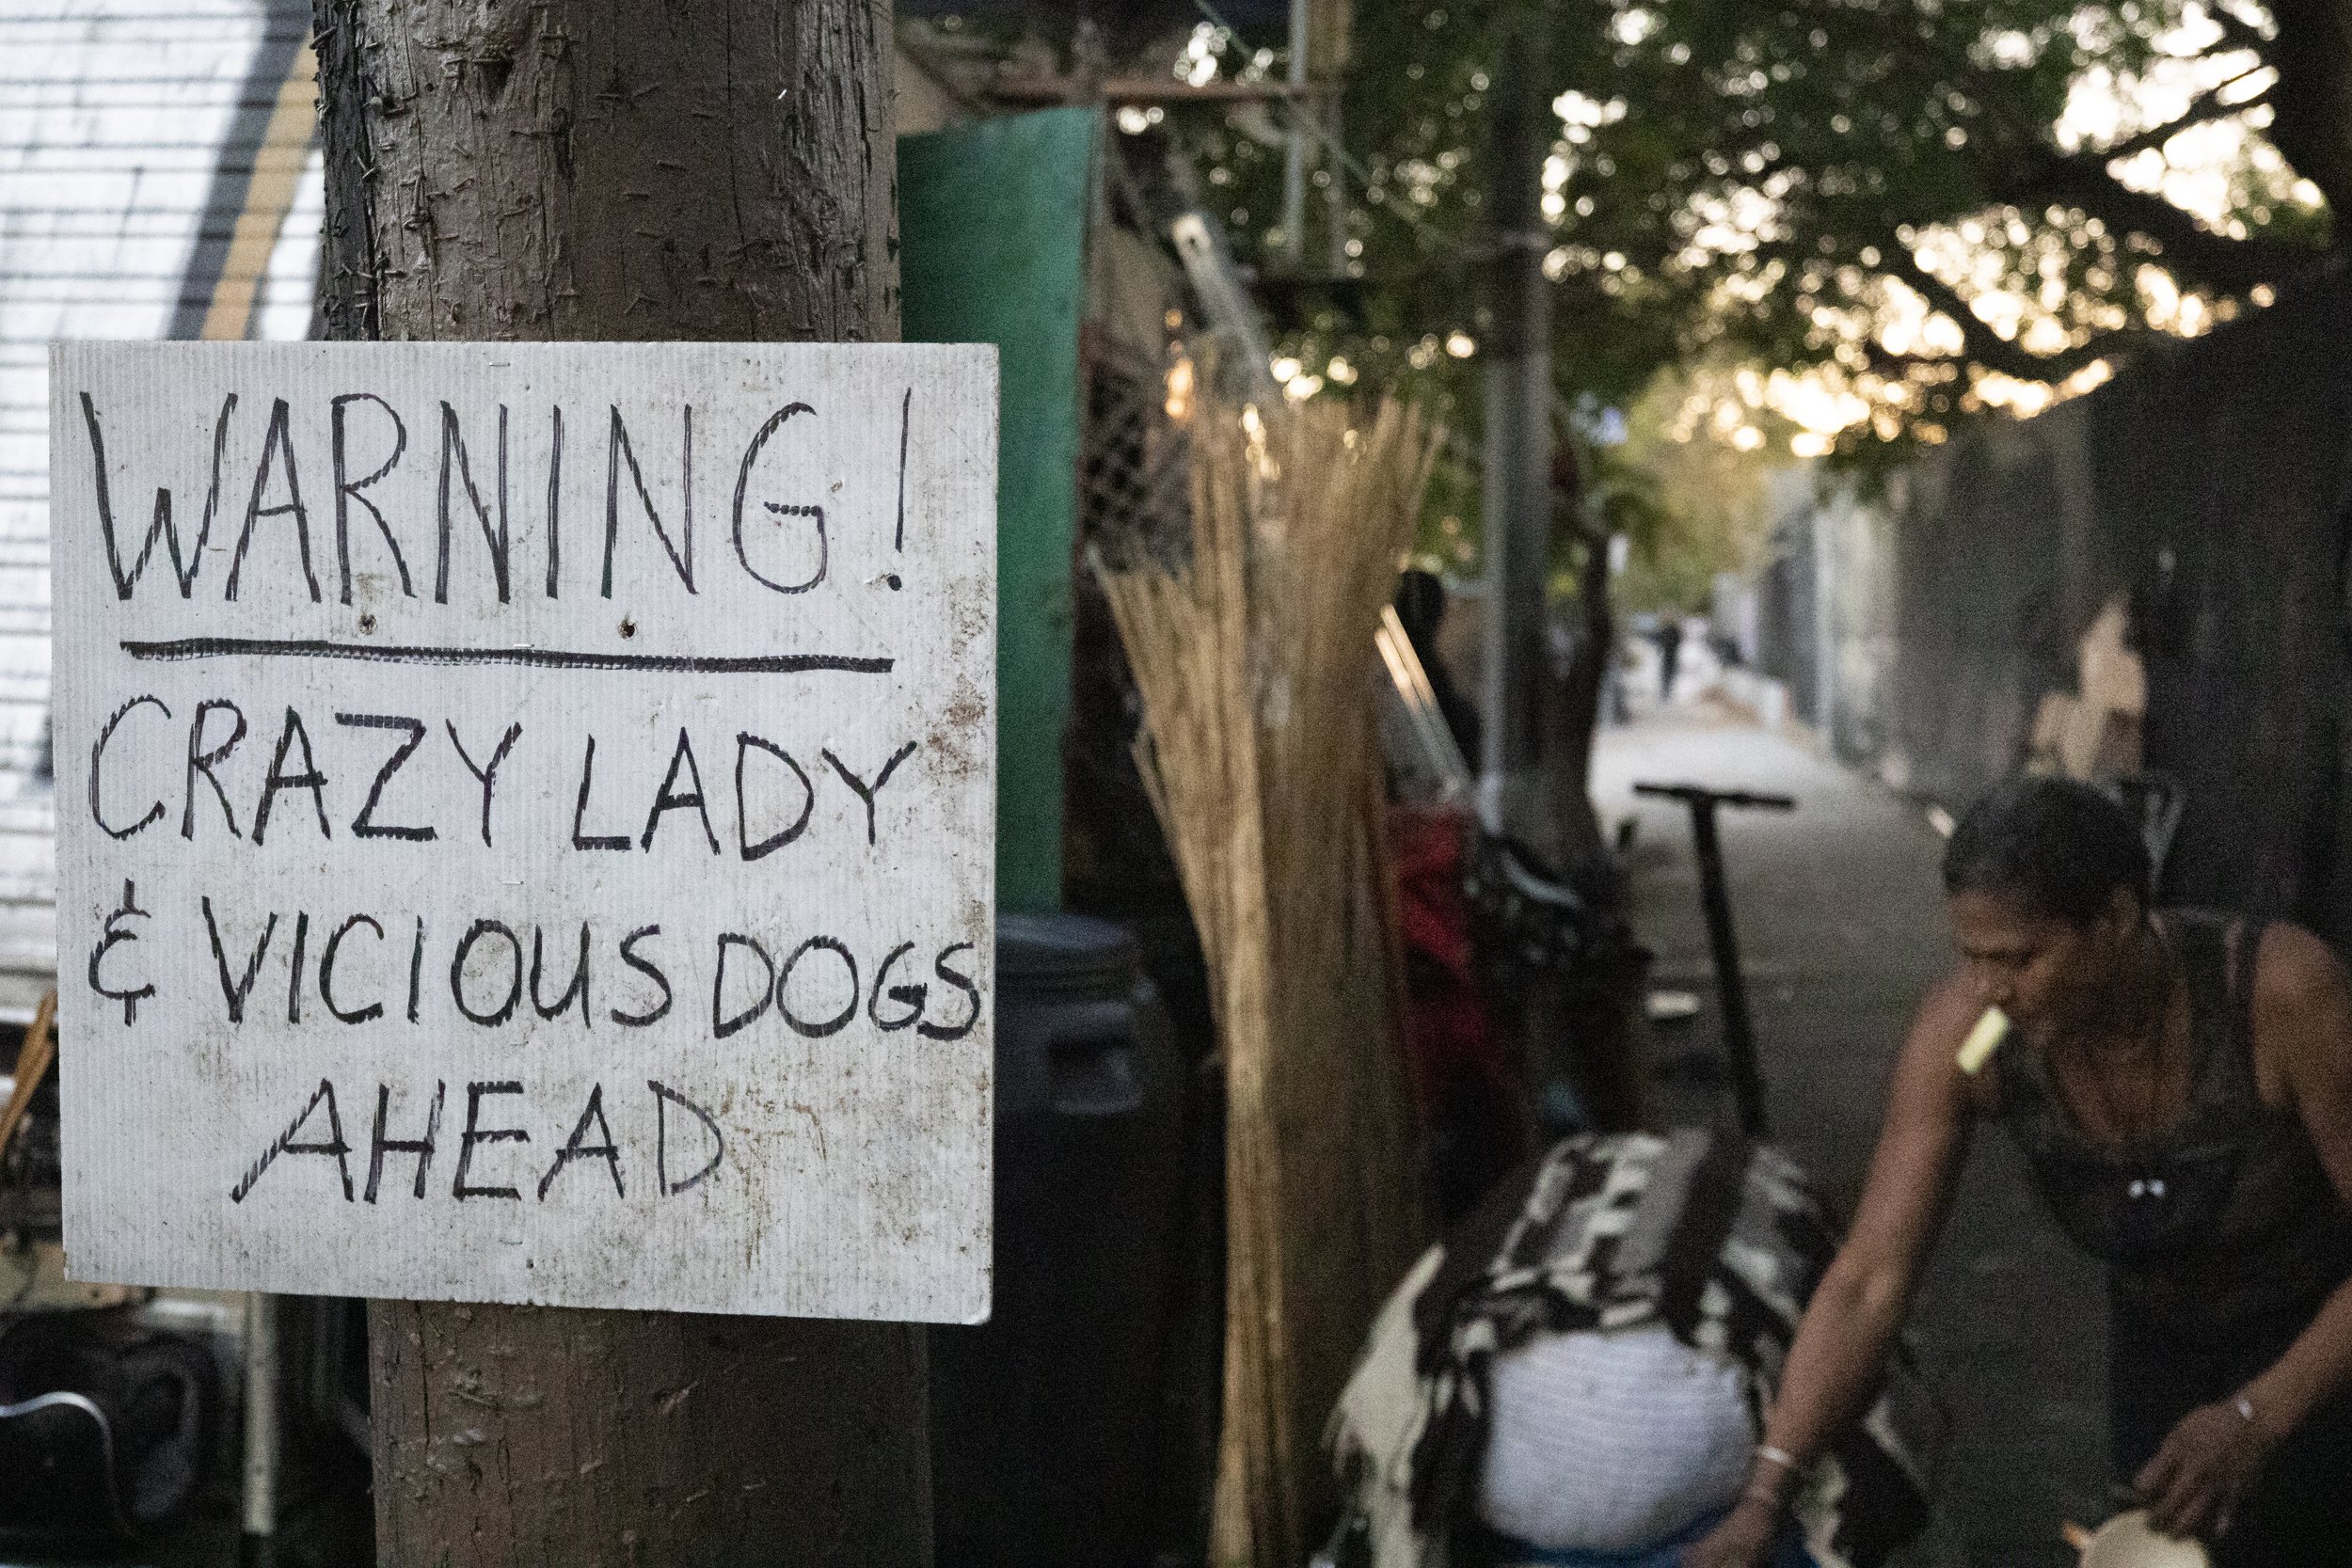  A sign which reads, “WARNING, CRAZY LADY & VICIOUS DOGS AHEAD,” stapled on a pole near the RV that Rebecca Dannenbaum lives in on Venice Blvd., in Los Angeles, Calif., on Nov. 5, 2023. Dannenbaum says it was put up soon after a neighbor’s dog attack